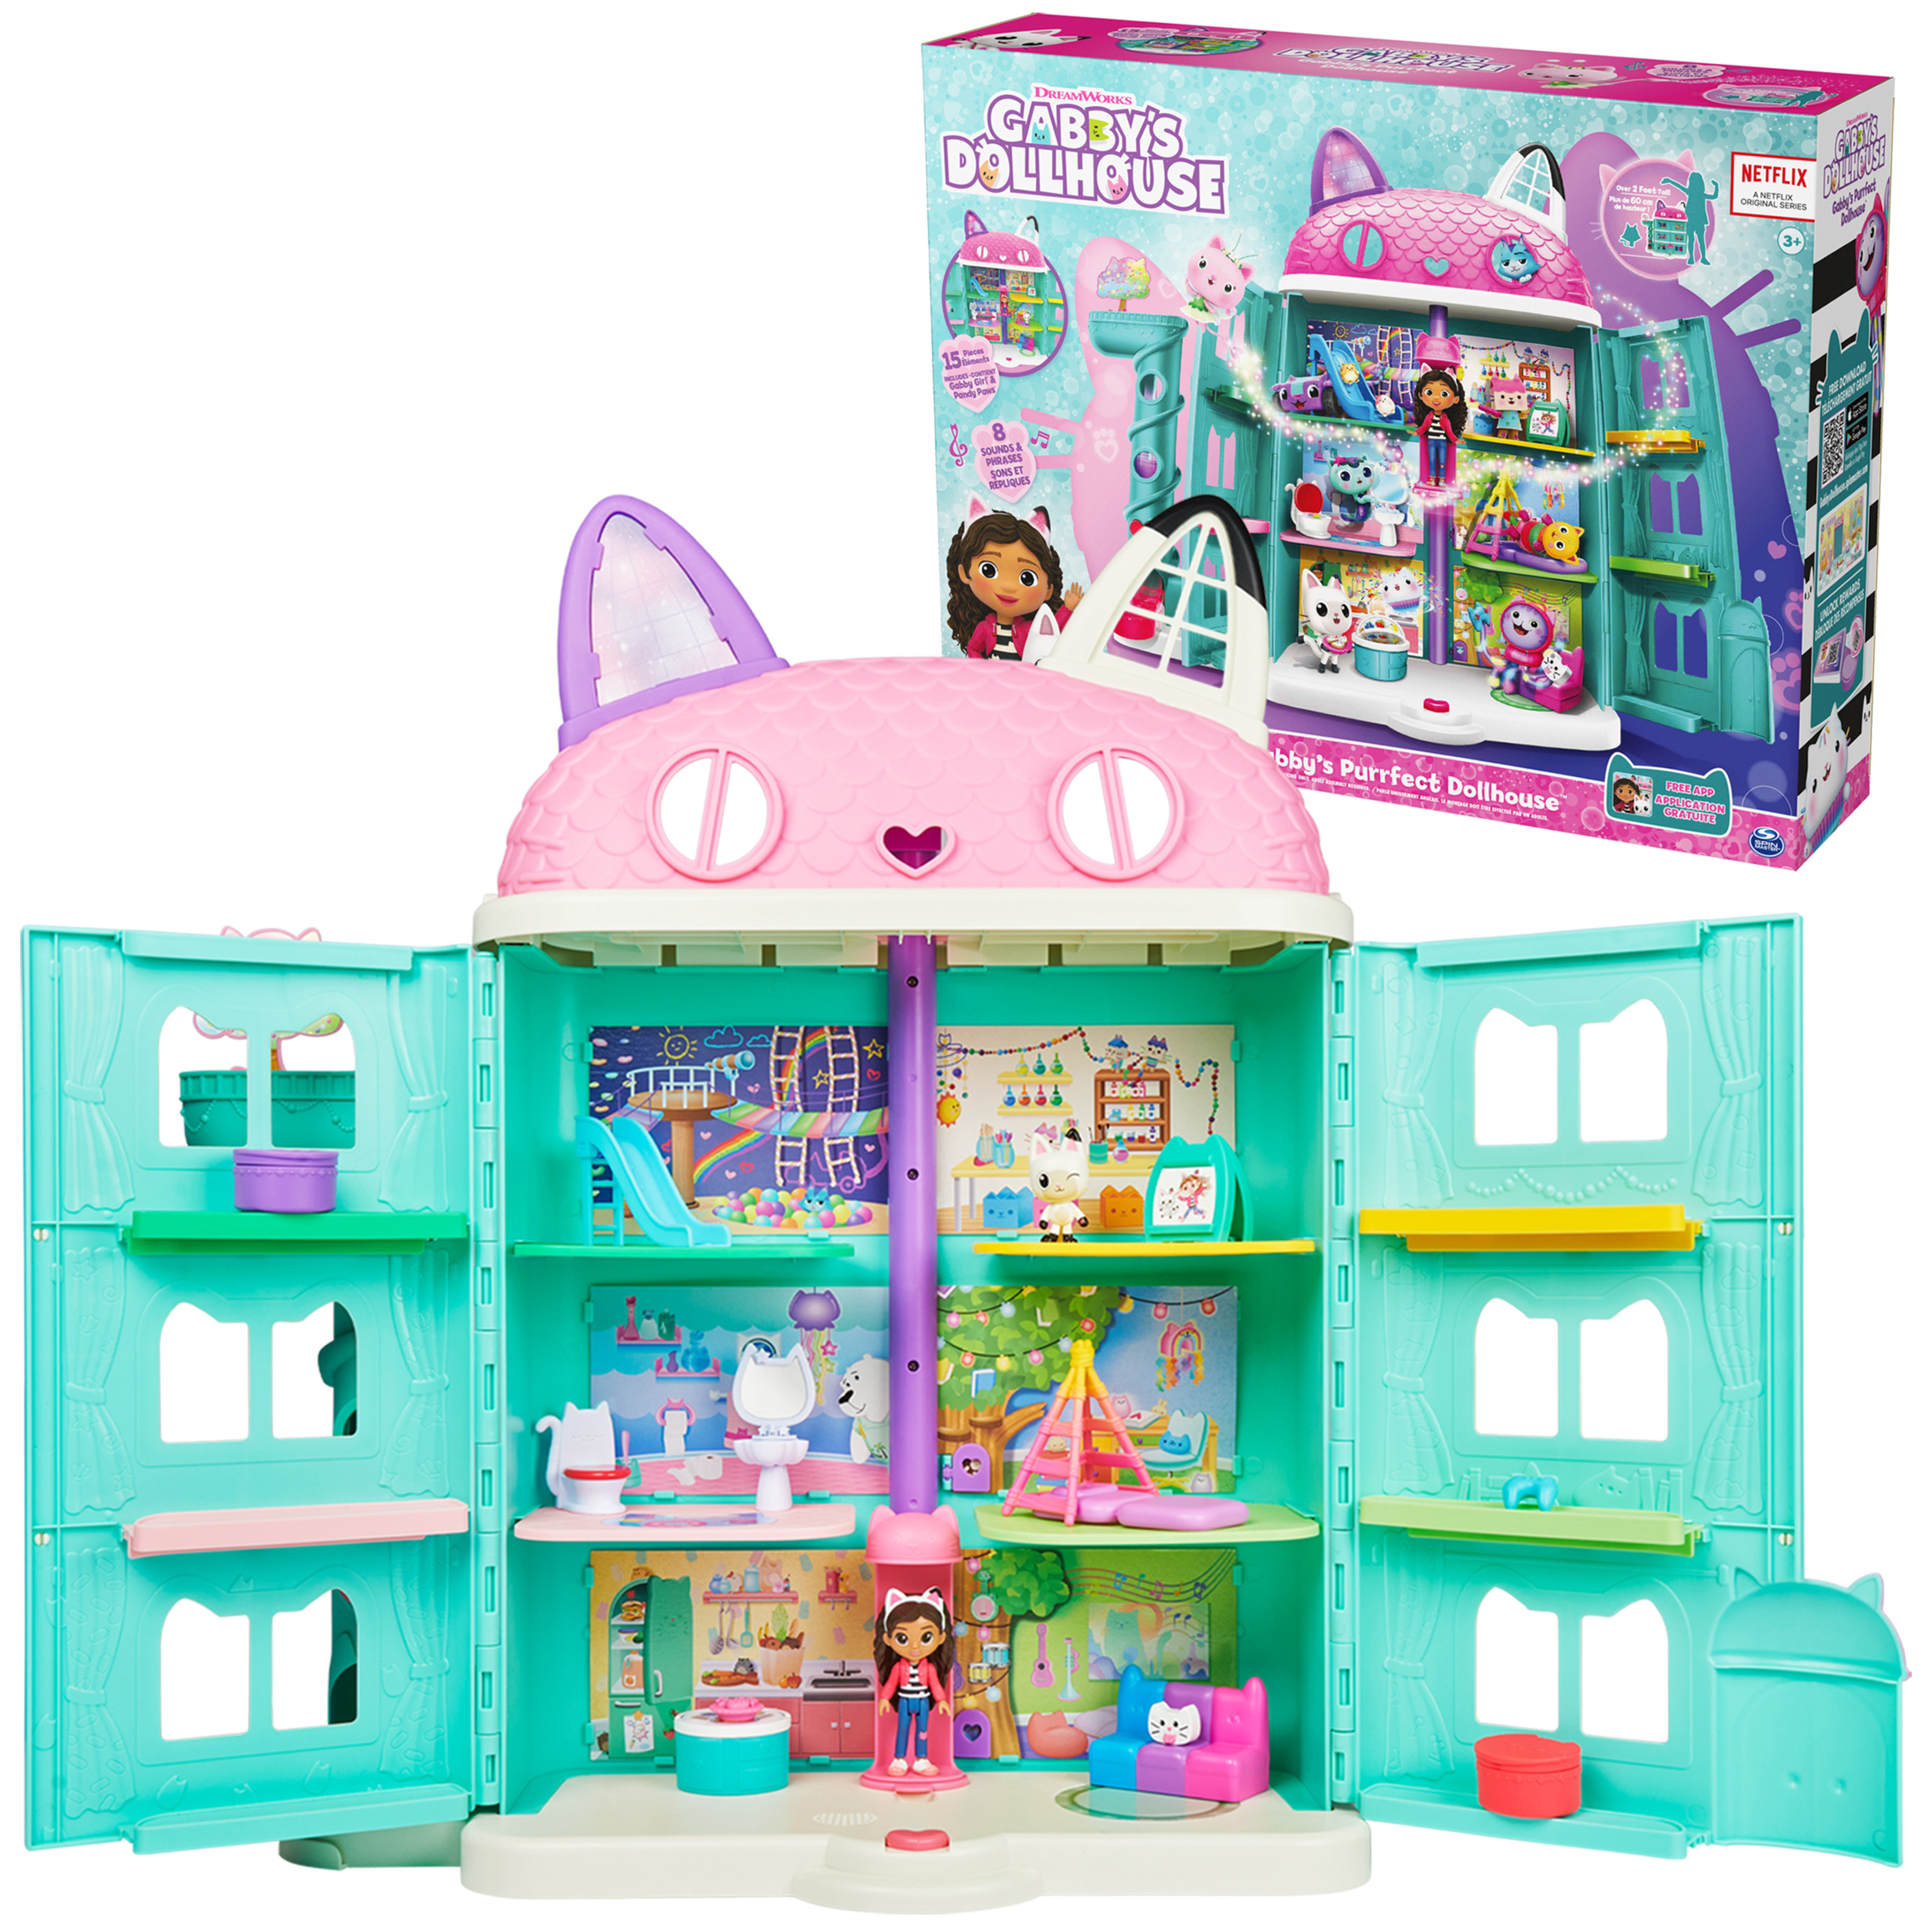 Gabby's Dollhouse, Purrfect Dollhouse 2-Foot Tall Playset with Sounds, 15 Pieces - image 1 of 5